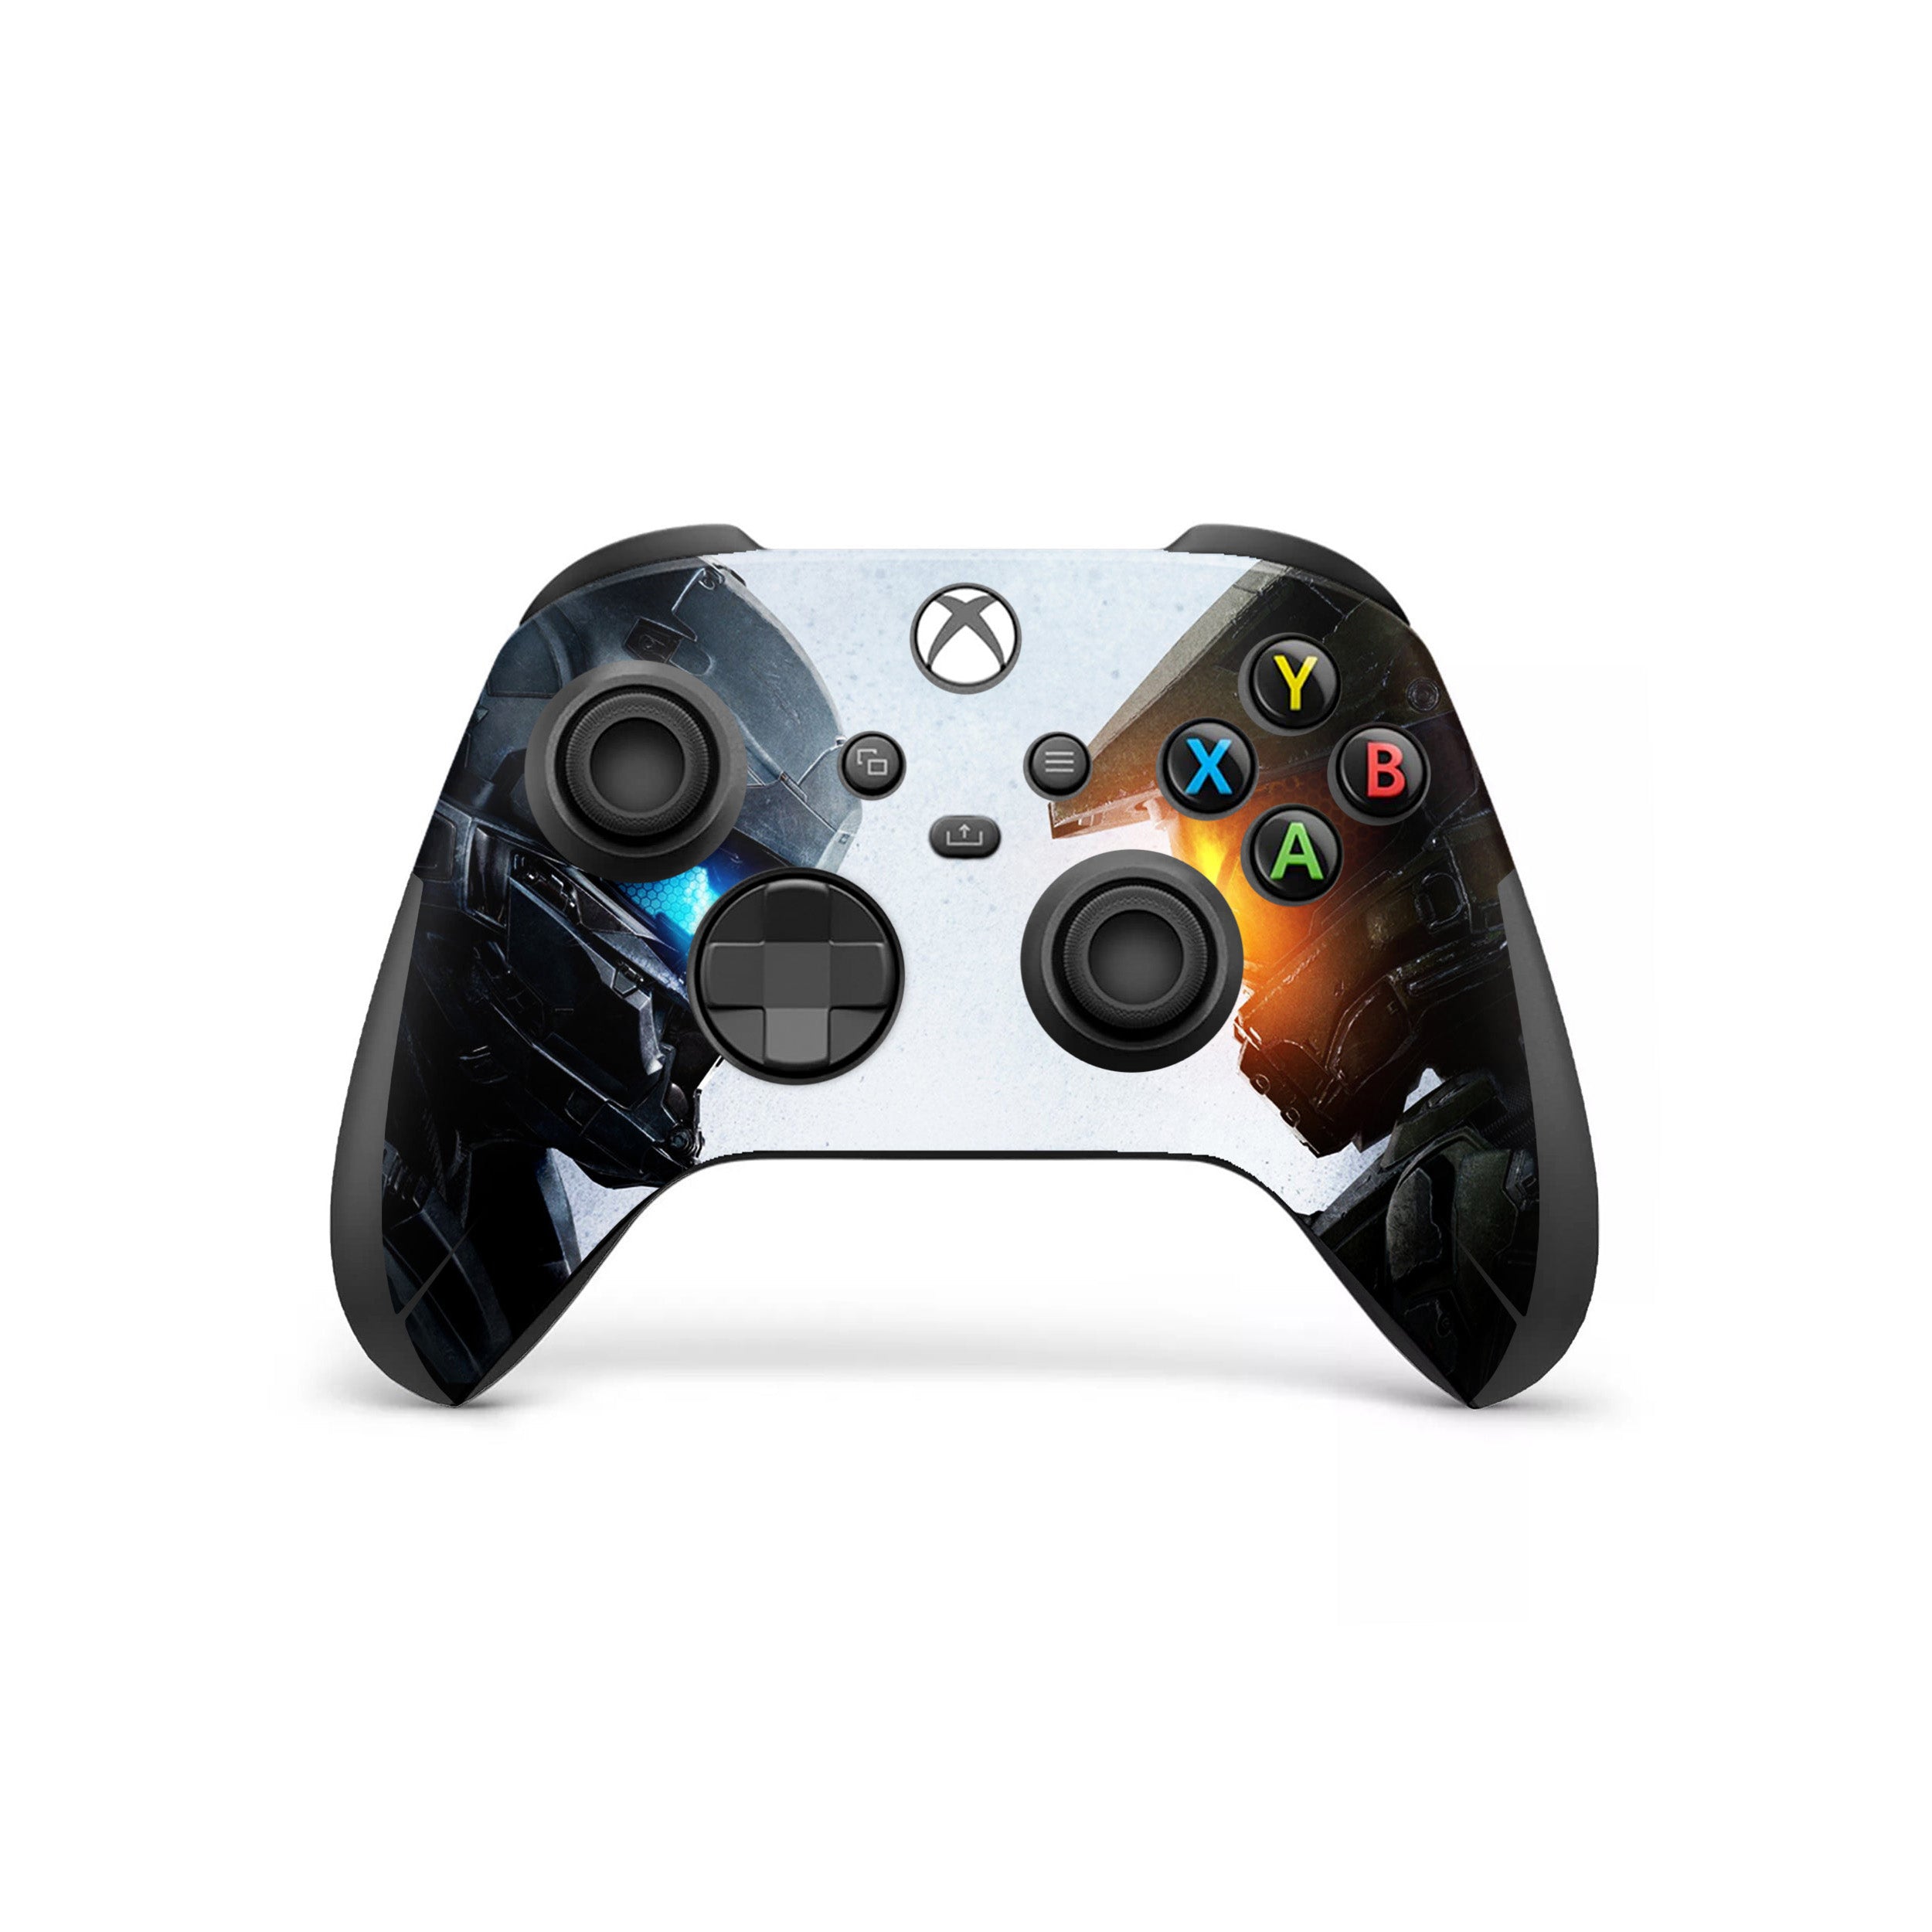 A video game skin featuring a Halo 5 design for the Xbox Wireless Controller.